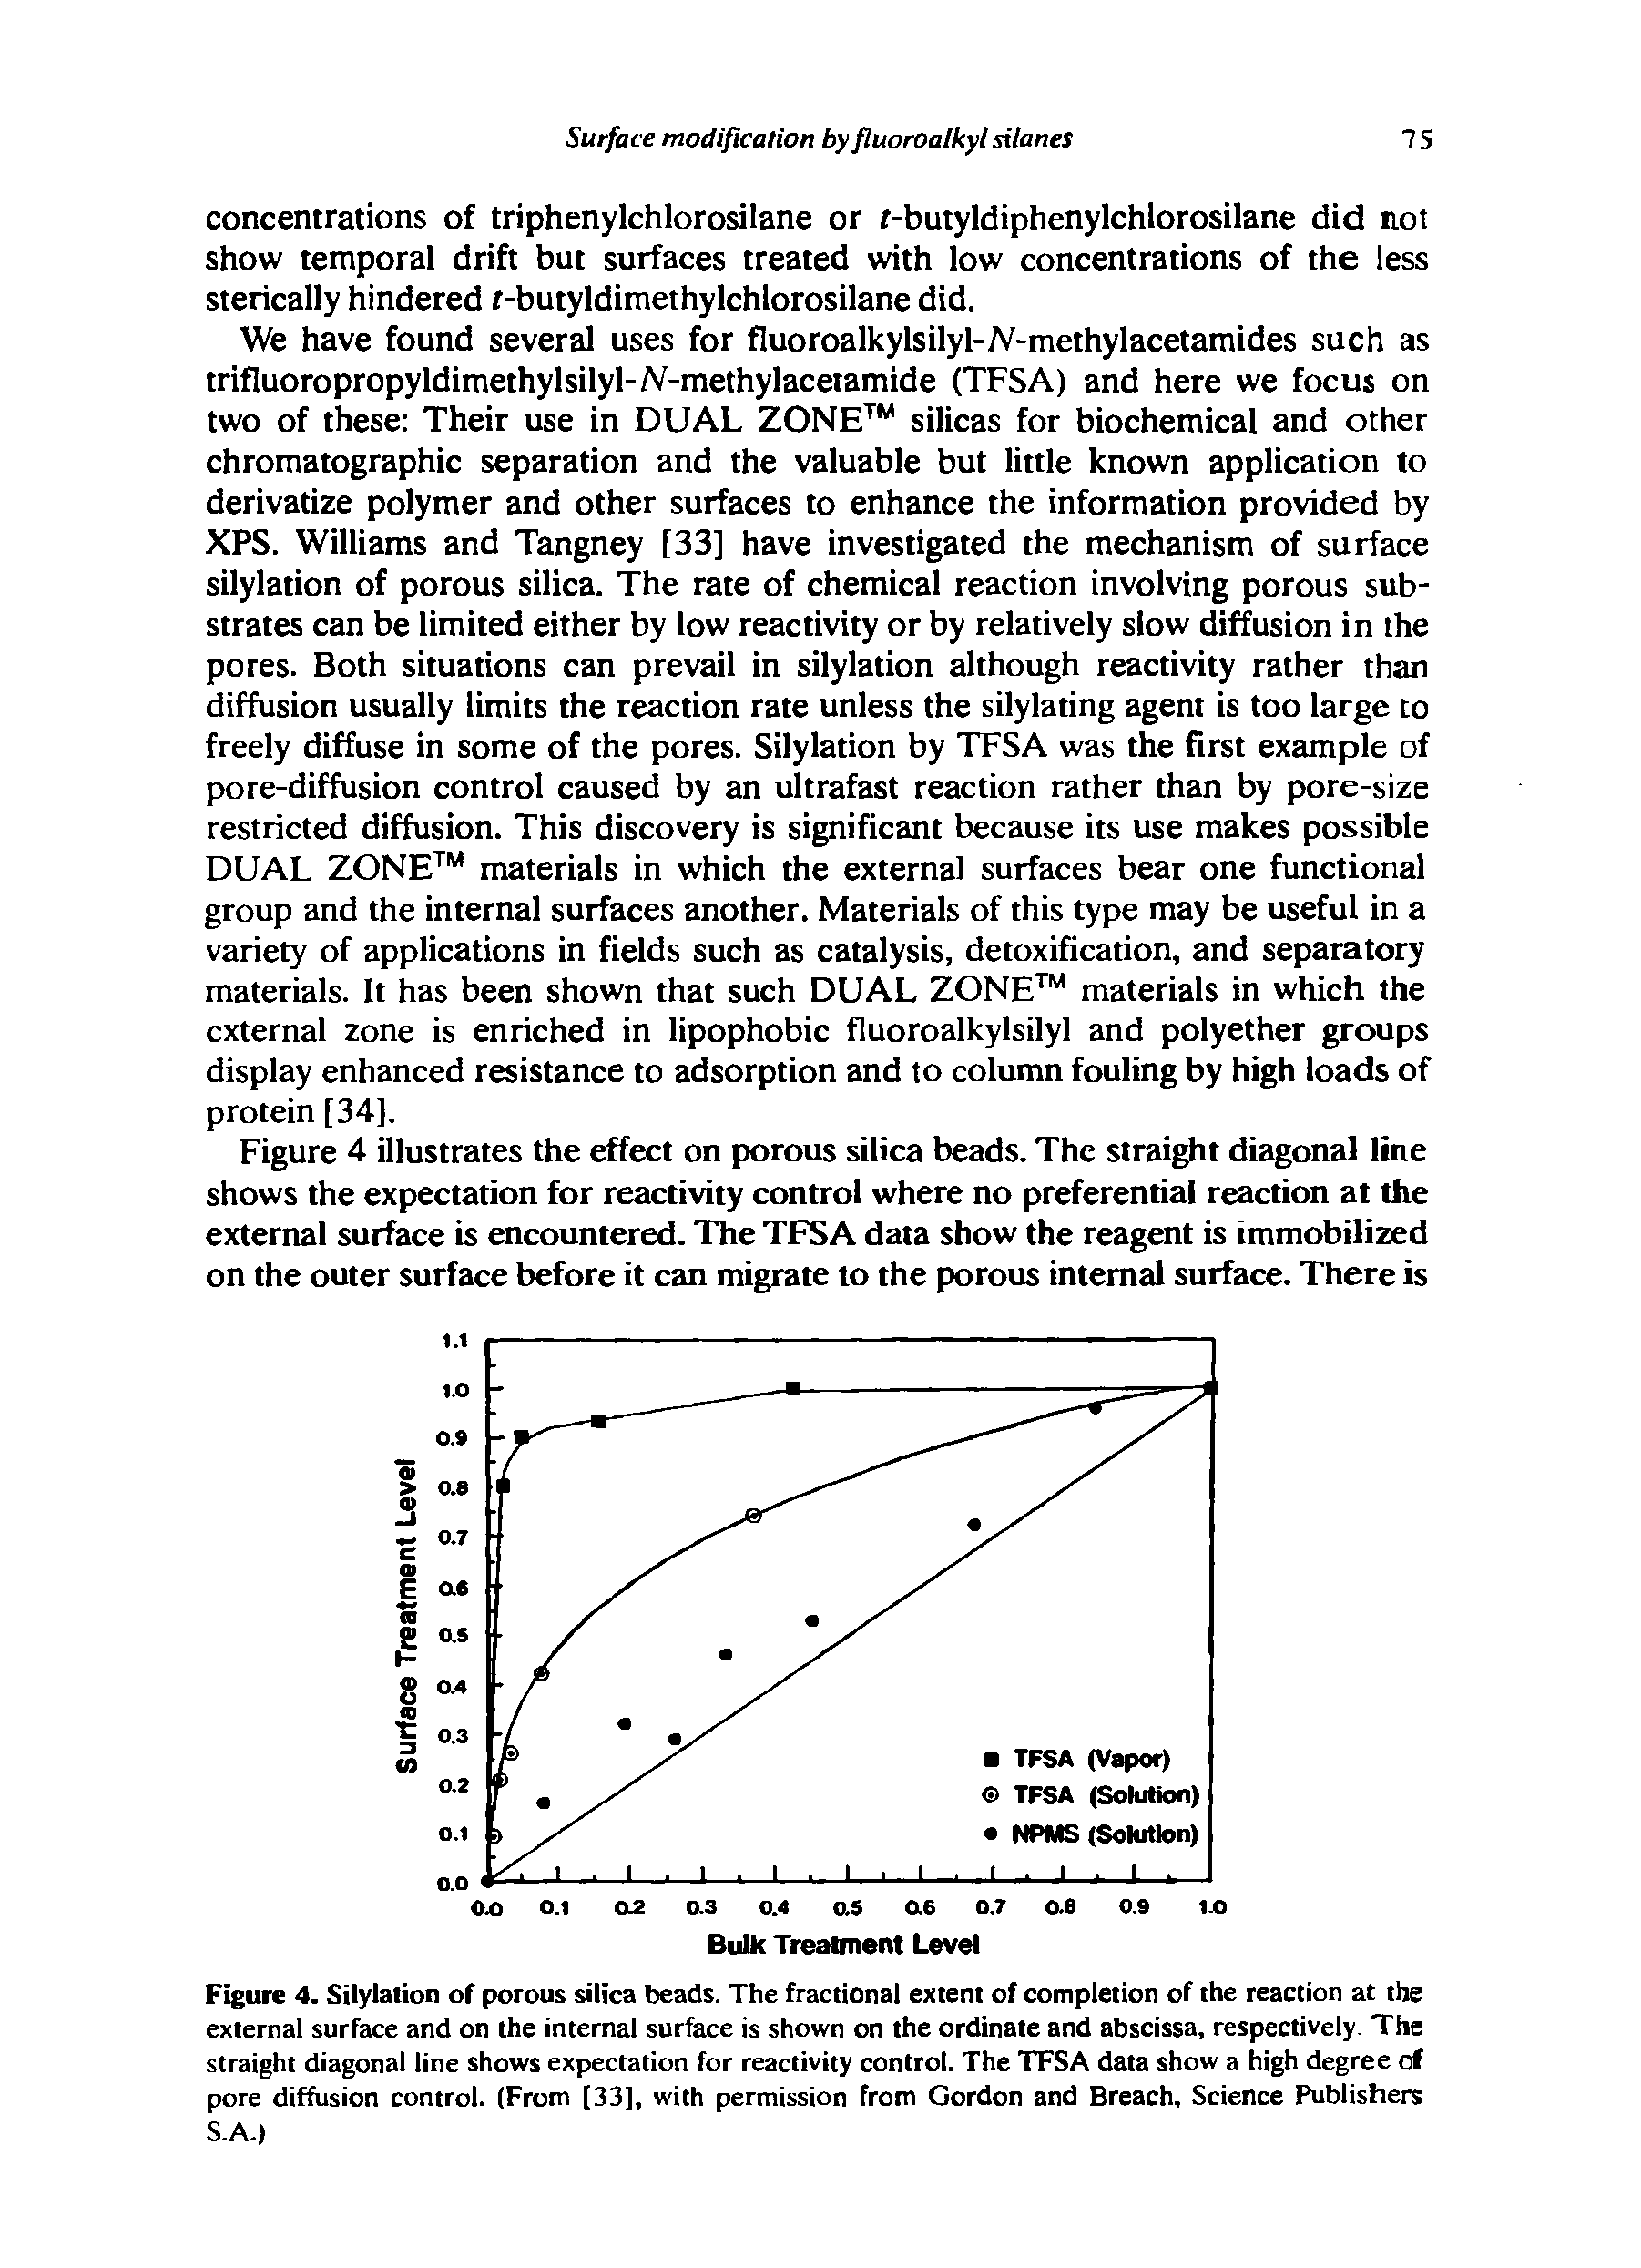 Figure 4. Silylation of porous silica beads. The fractional extent of completion of the reaction at the external surface and on the internal surface is shown on the ordinate and abscissa, respectively. The straight diagonal line shows expectation for reactivity control. The TFSA data show a high degree of pore diffusion control. (From [33], with permission from Gordon and Breach, Science Publishers S.A.)...